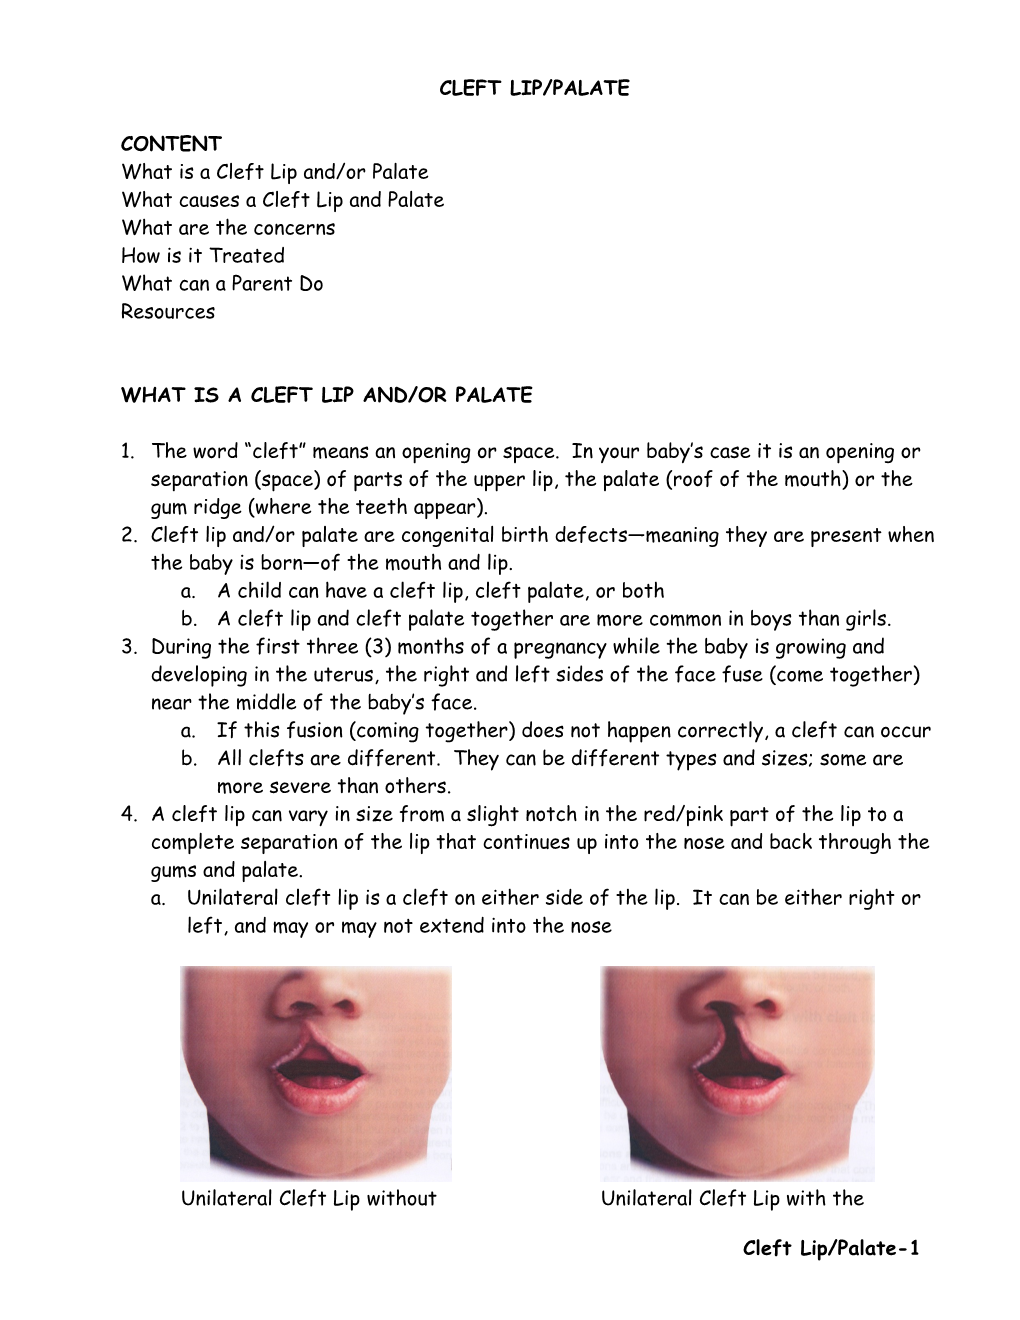 Cleft Lip/Palate